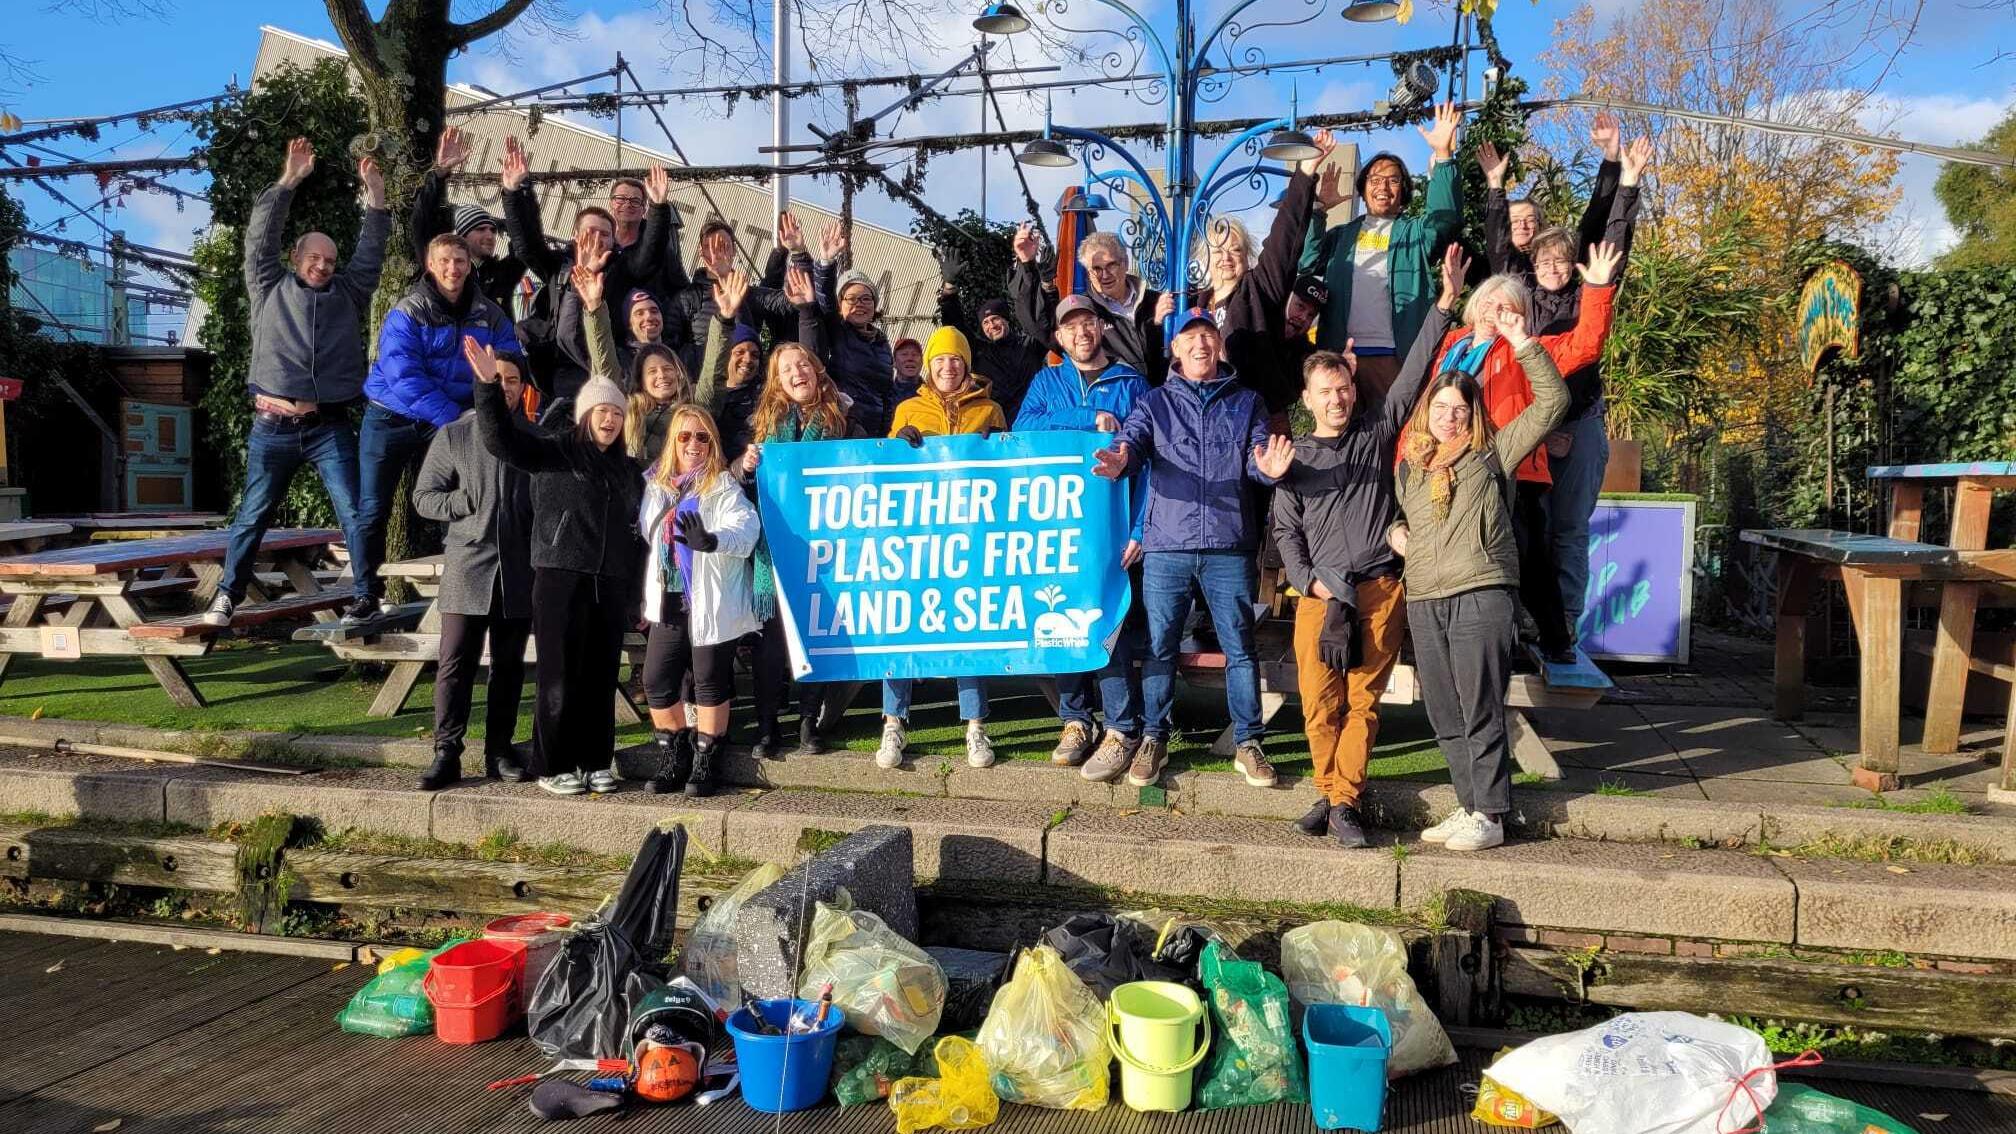 Group photo of Unity volunteers who helped clean trash out of the Amsterdam canals